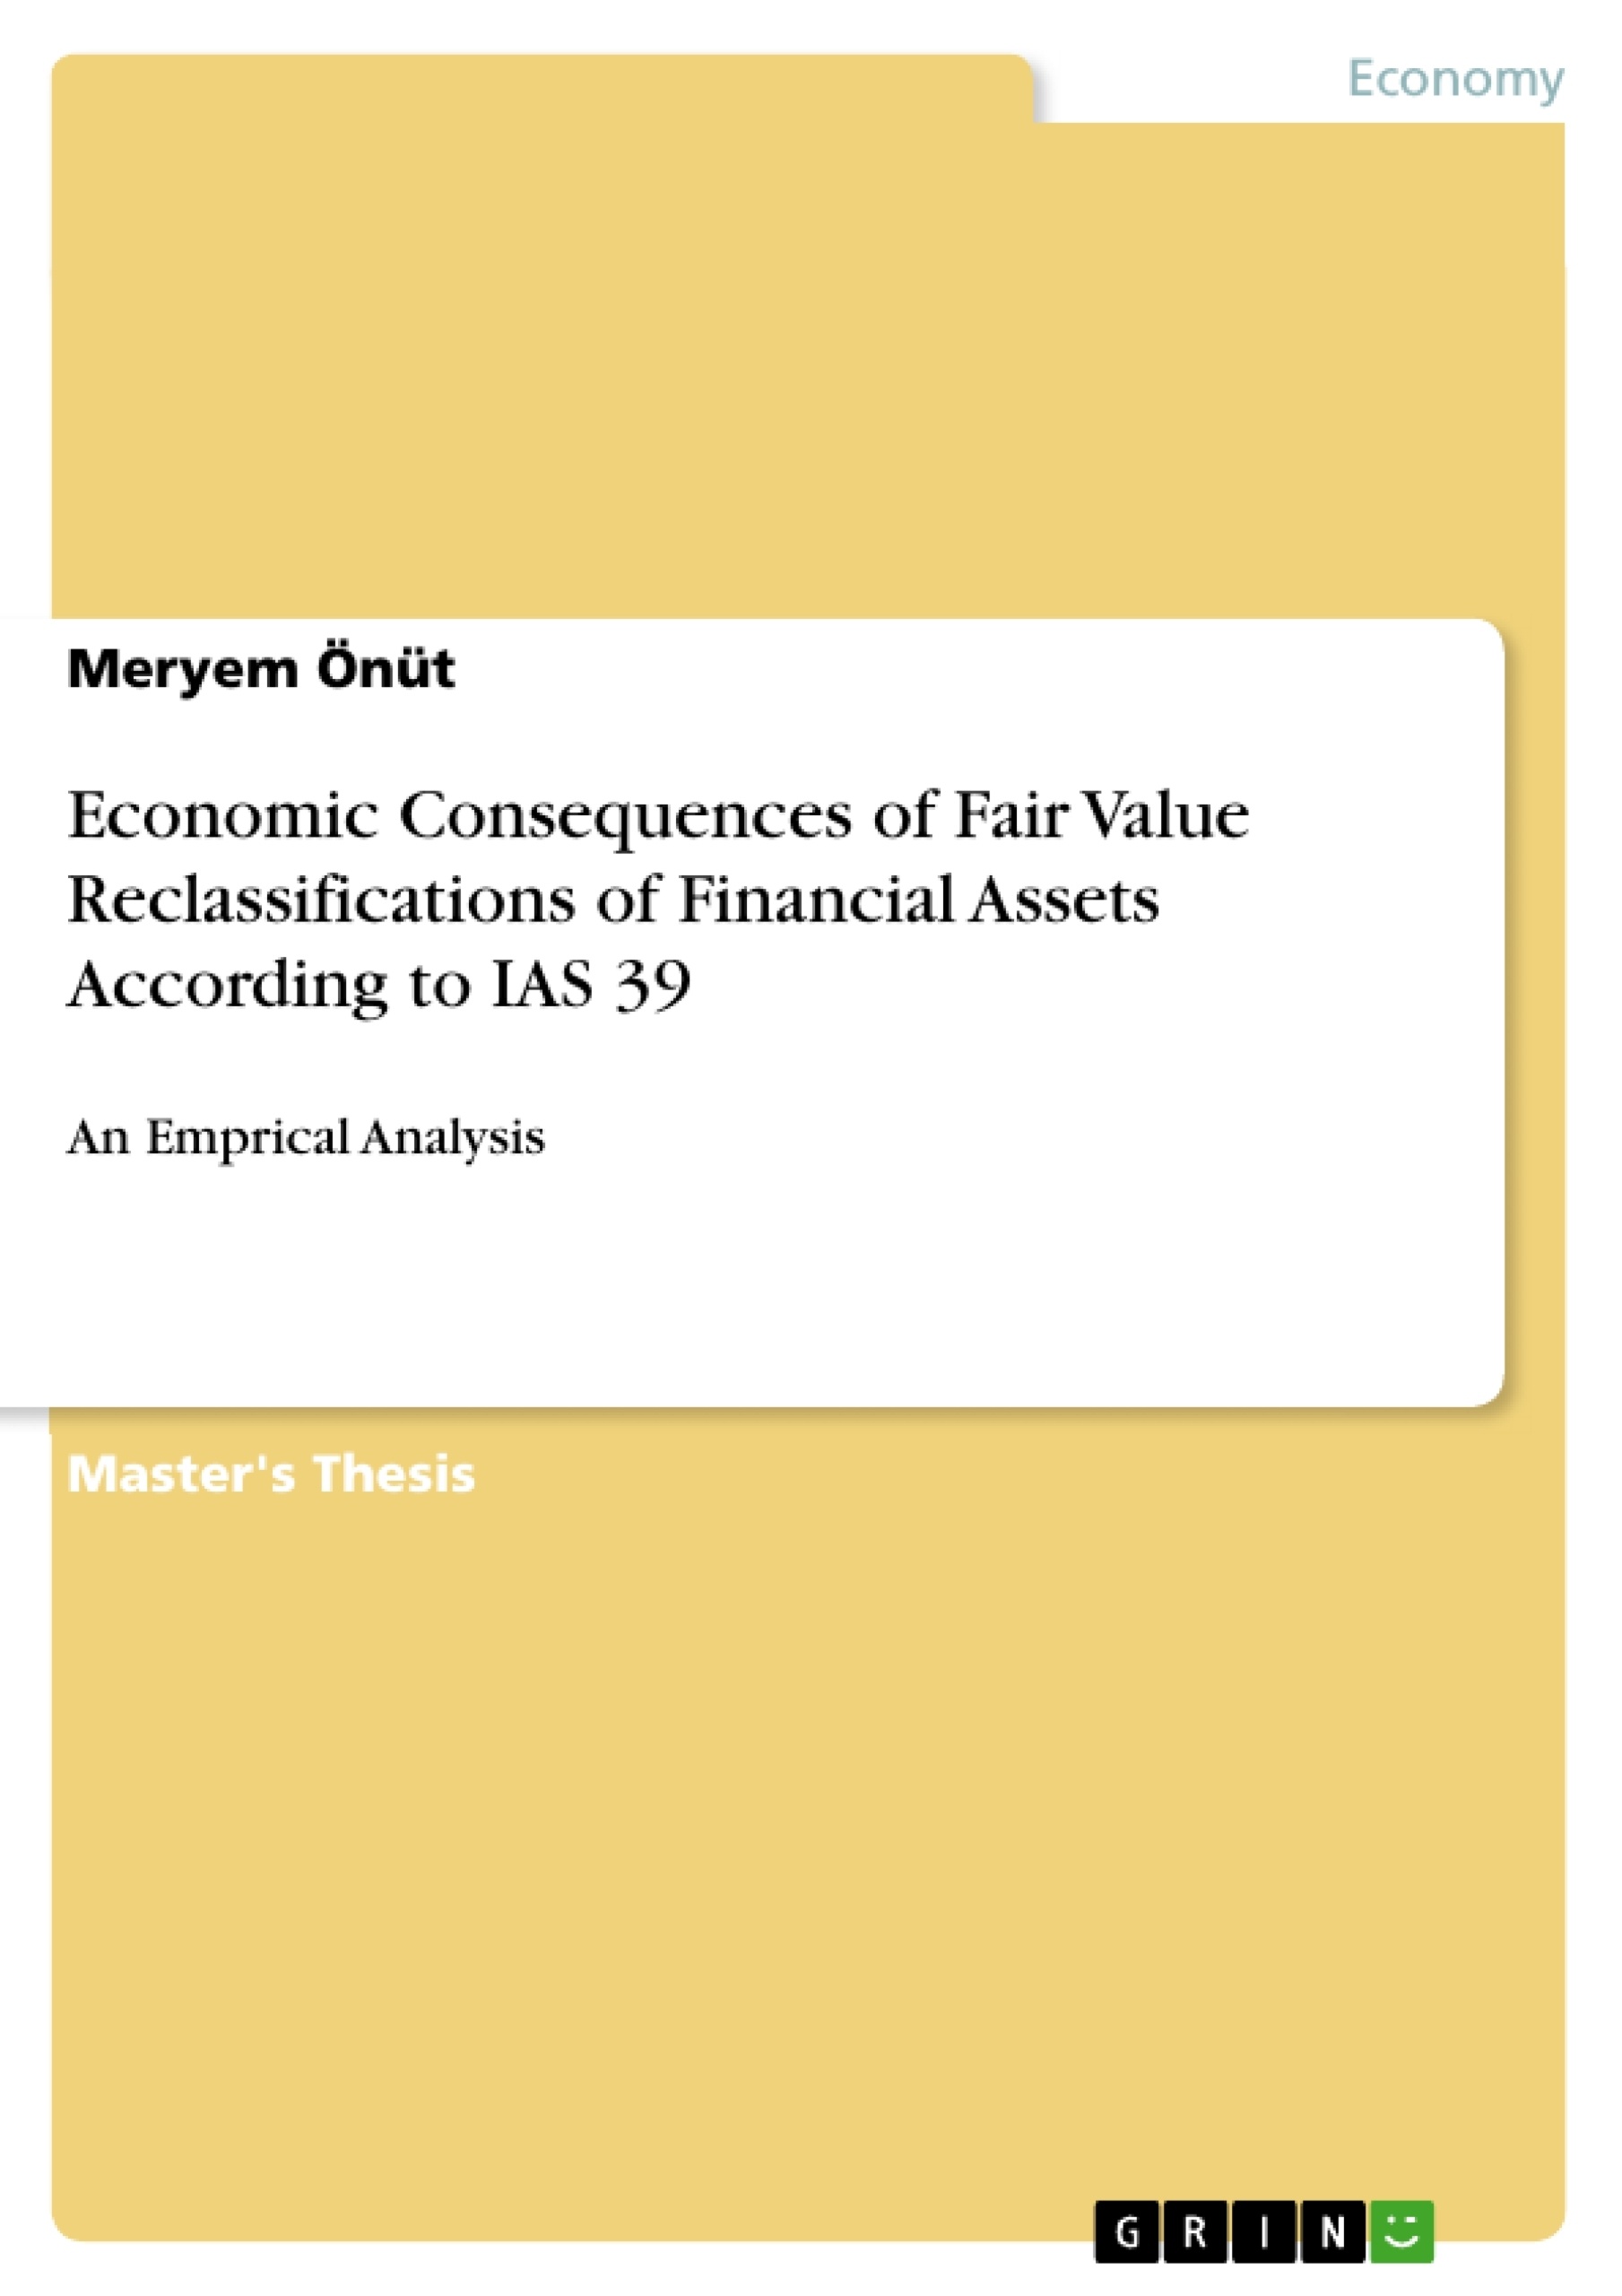 Title: Economic Consequences of Fair Value Reclassifications of Financial Assets According to IAS 39